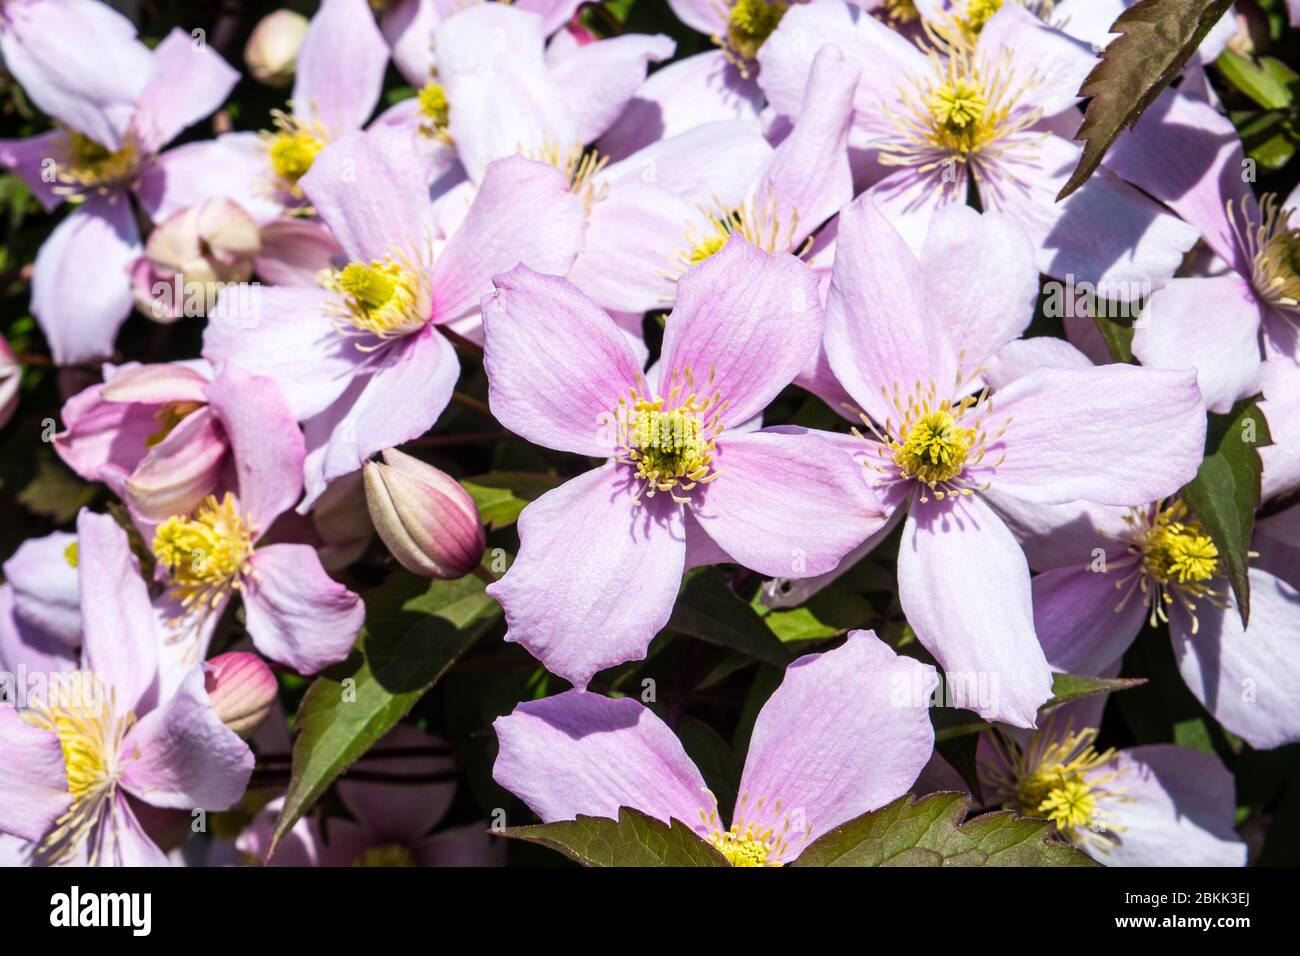 A close up of the tightly clustered pink flowers of Clematis montana open in the spring sunshine Stock Photo